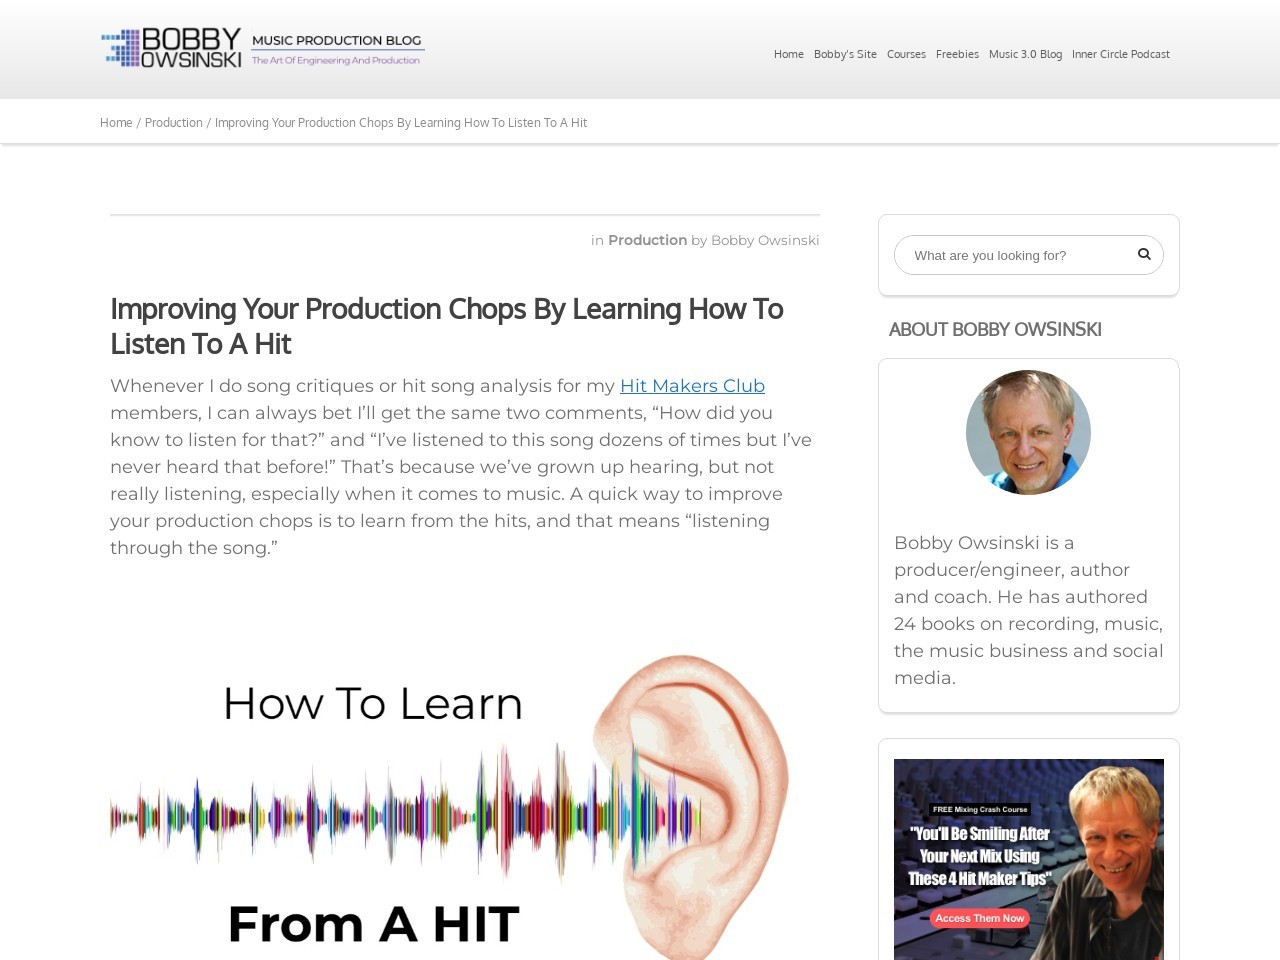 Improving Your Production Chops By Learning How To Listen To A Hit - Bobby Owsinski's Music Production Blog